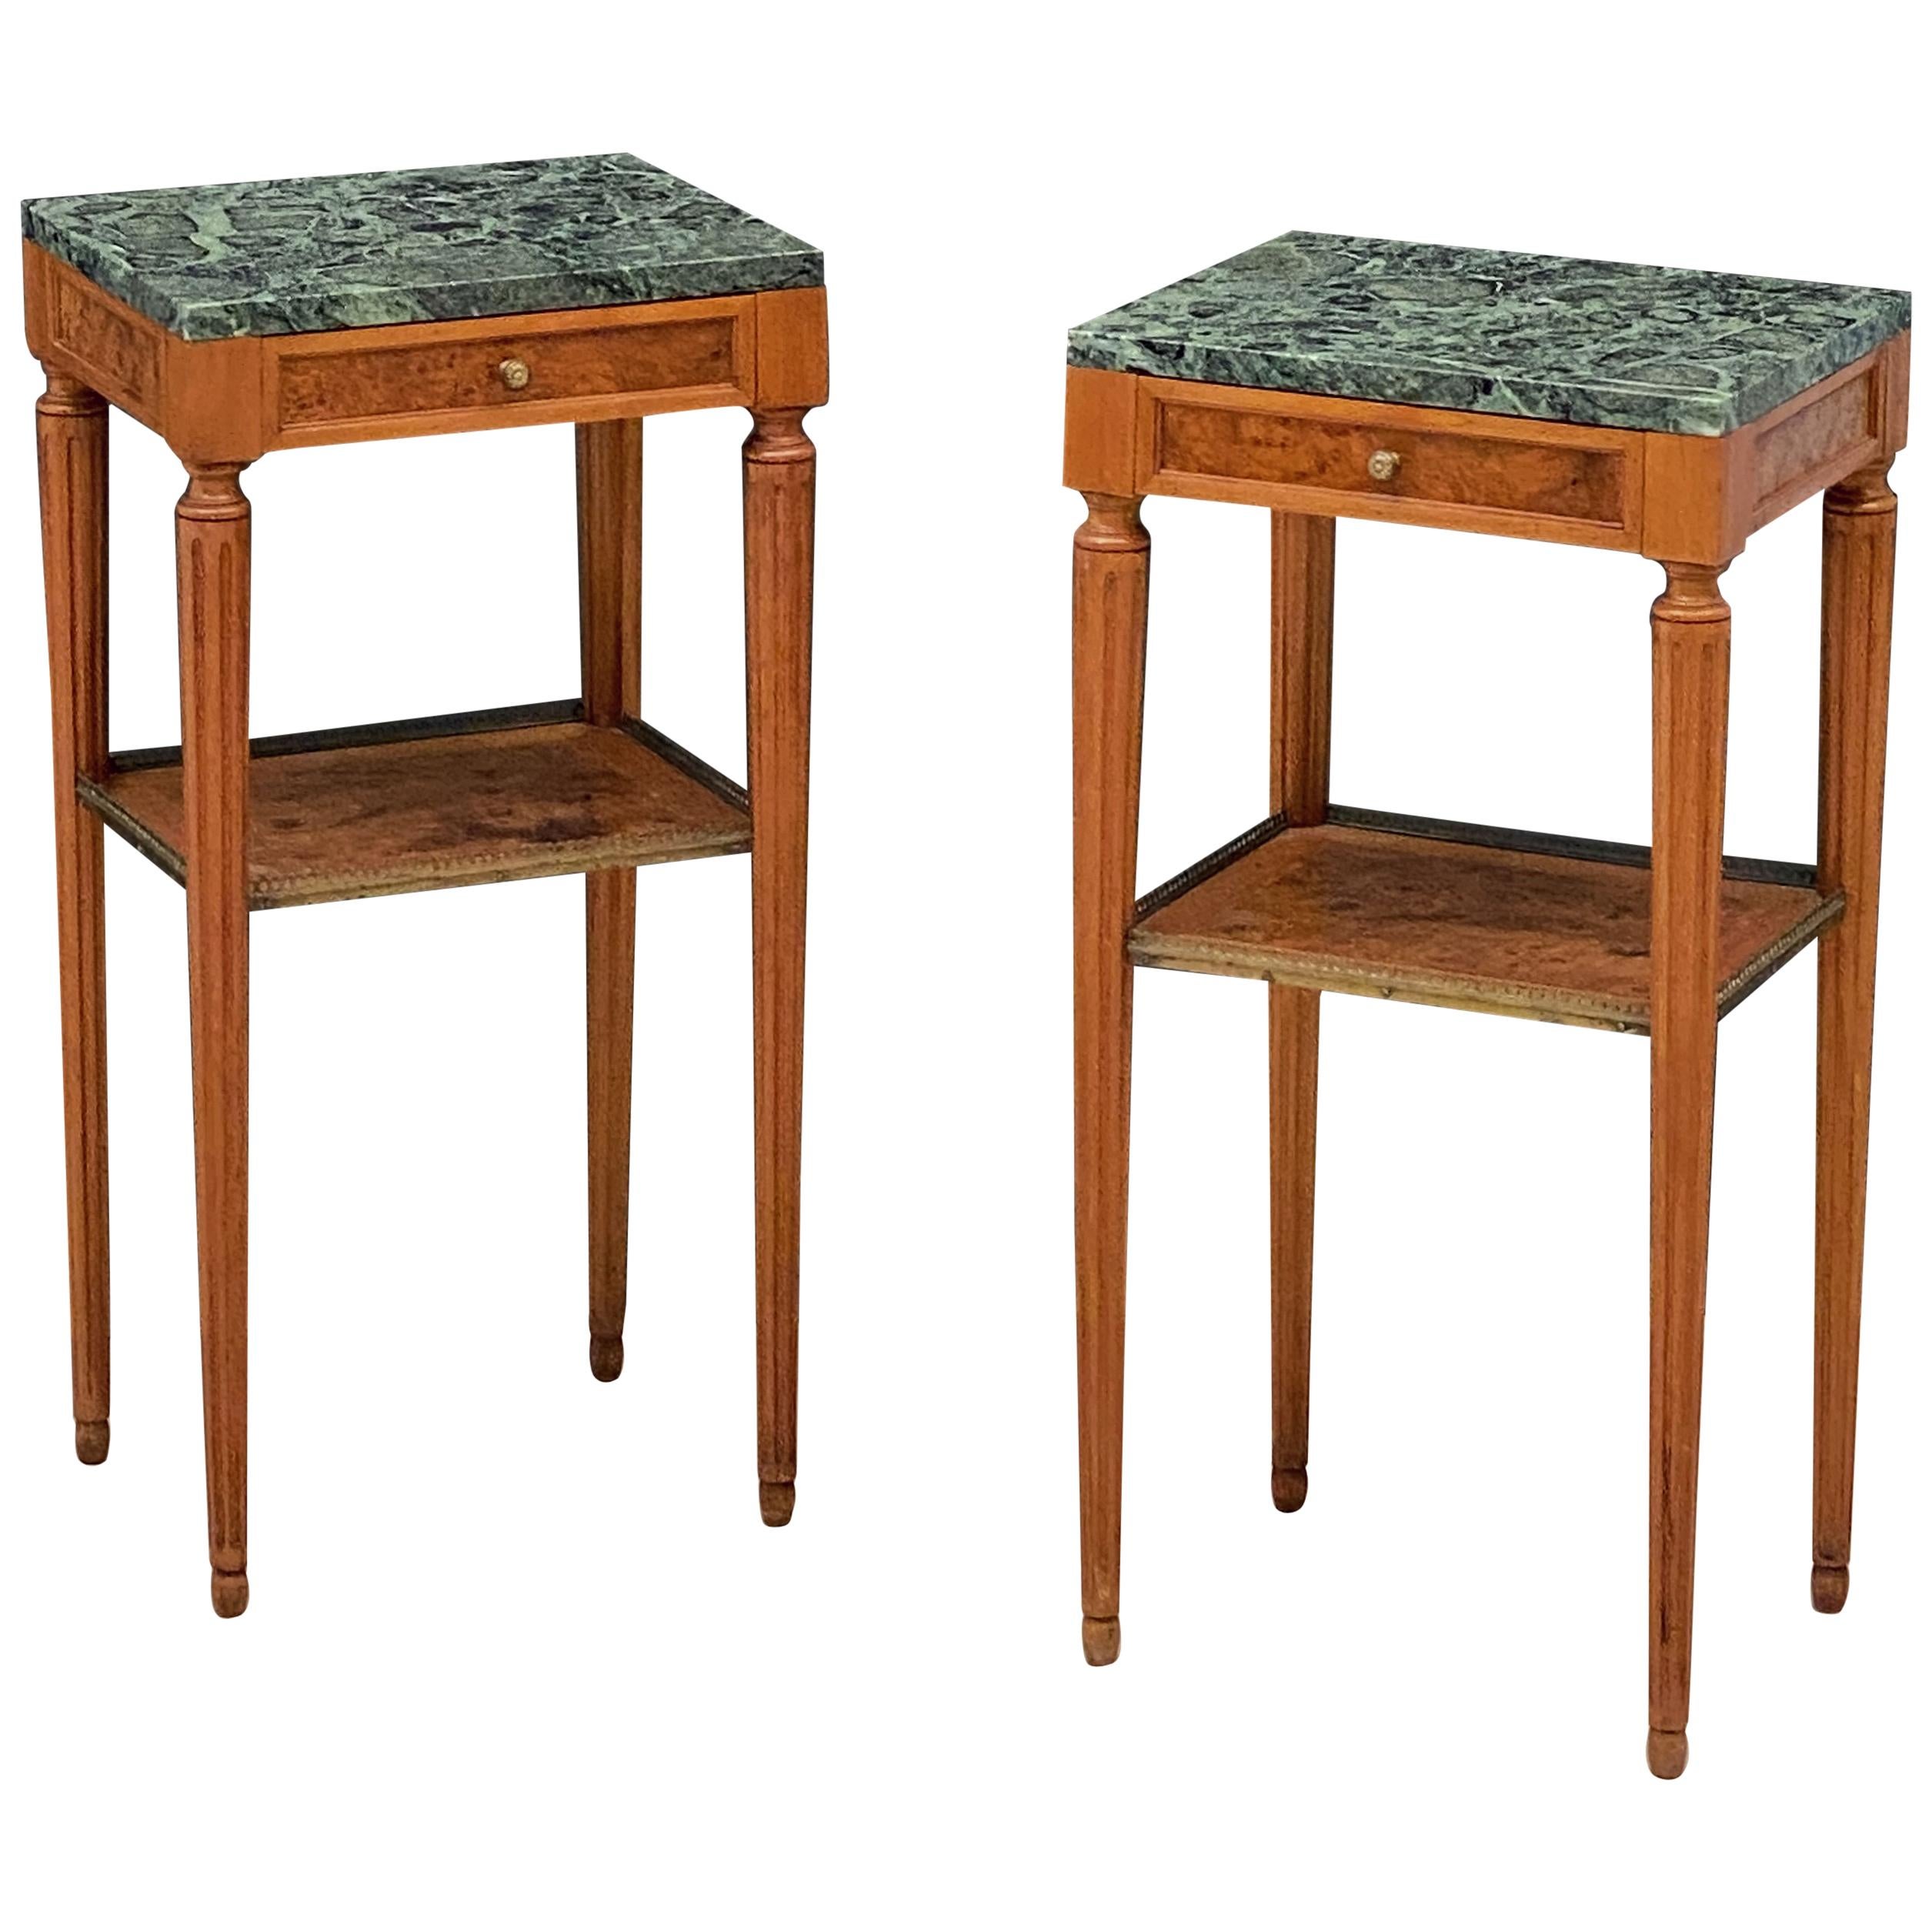 French Nightstands or Bedside Tables with Marble Tops, Individually Priced